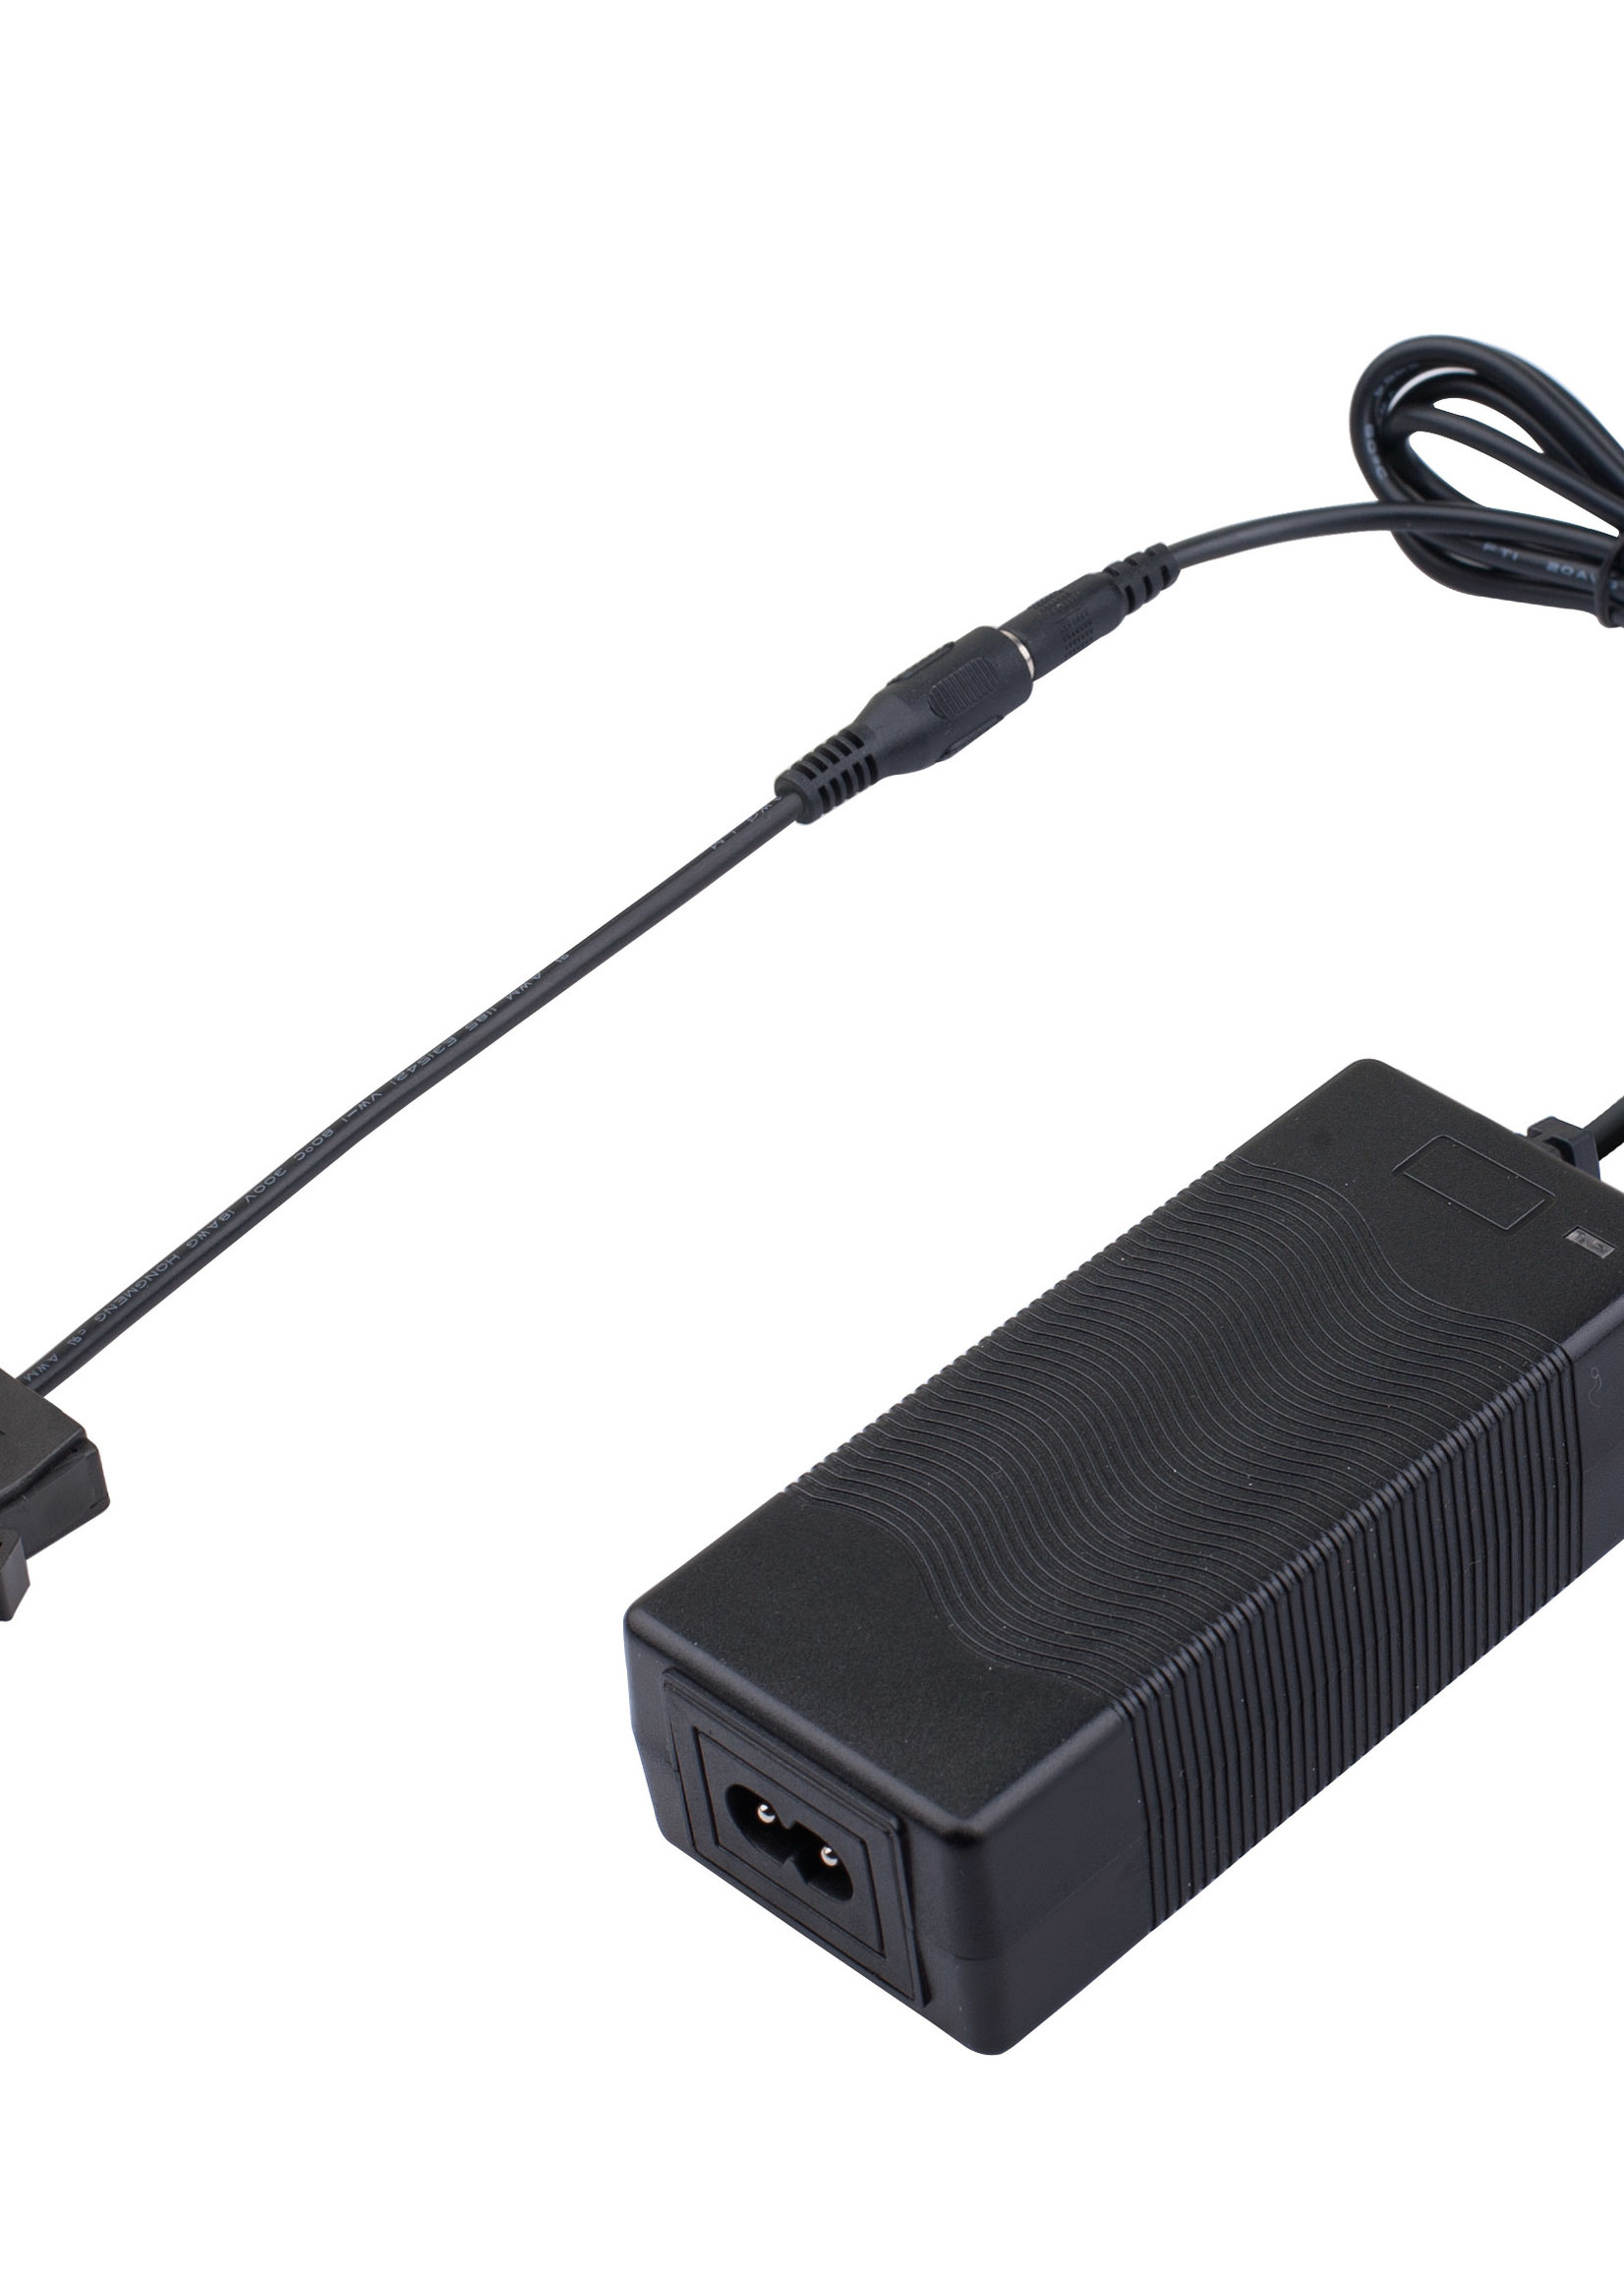 Swit PC-U130S Portable V-mount Battery Charger